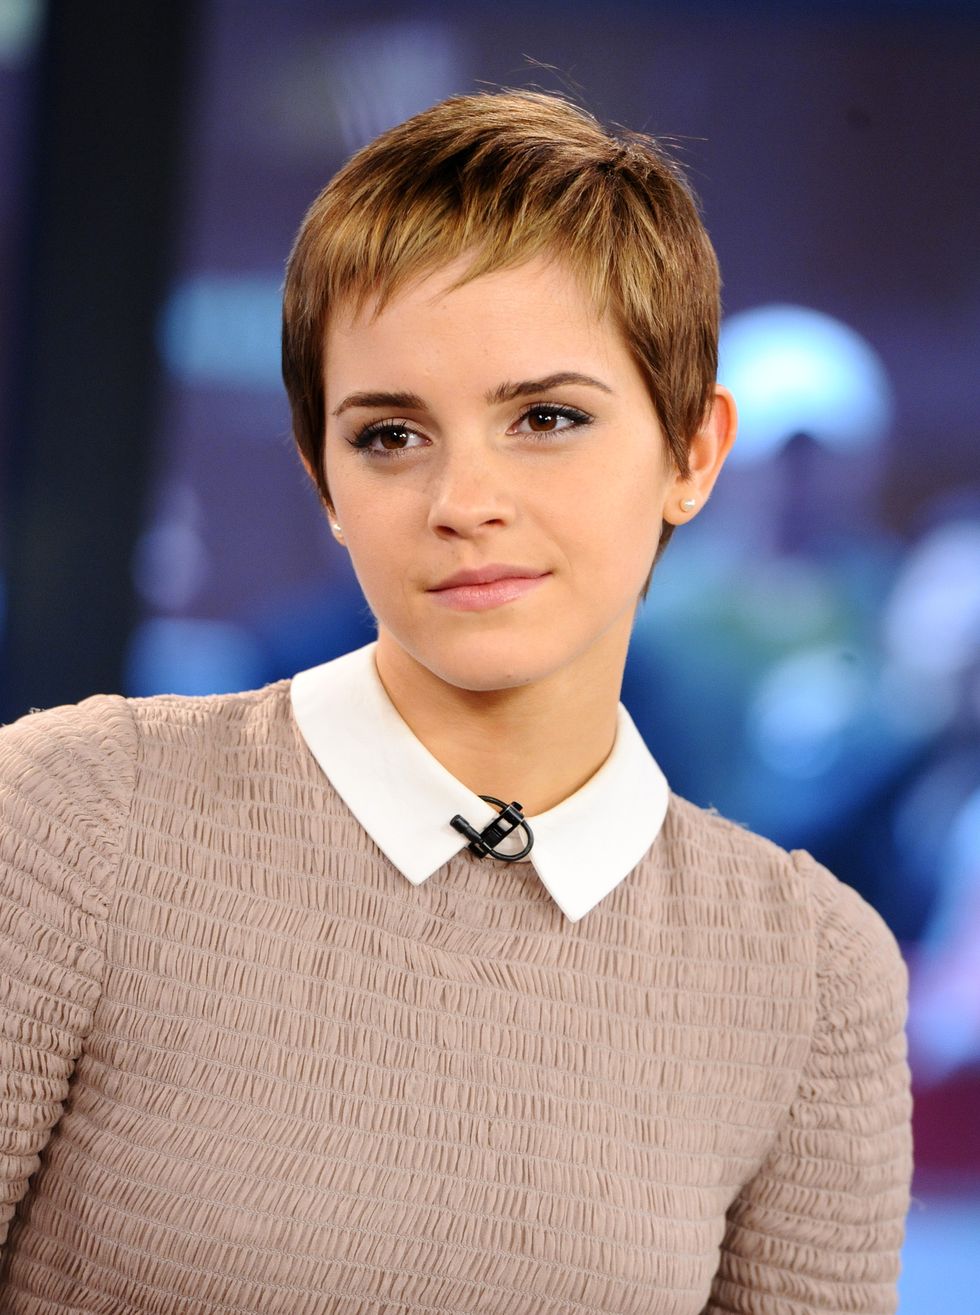 today    pictured emma watson appears on nbc news today show  photo by peter kramernbcu photo banknbcuniversal via getty images via getty images